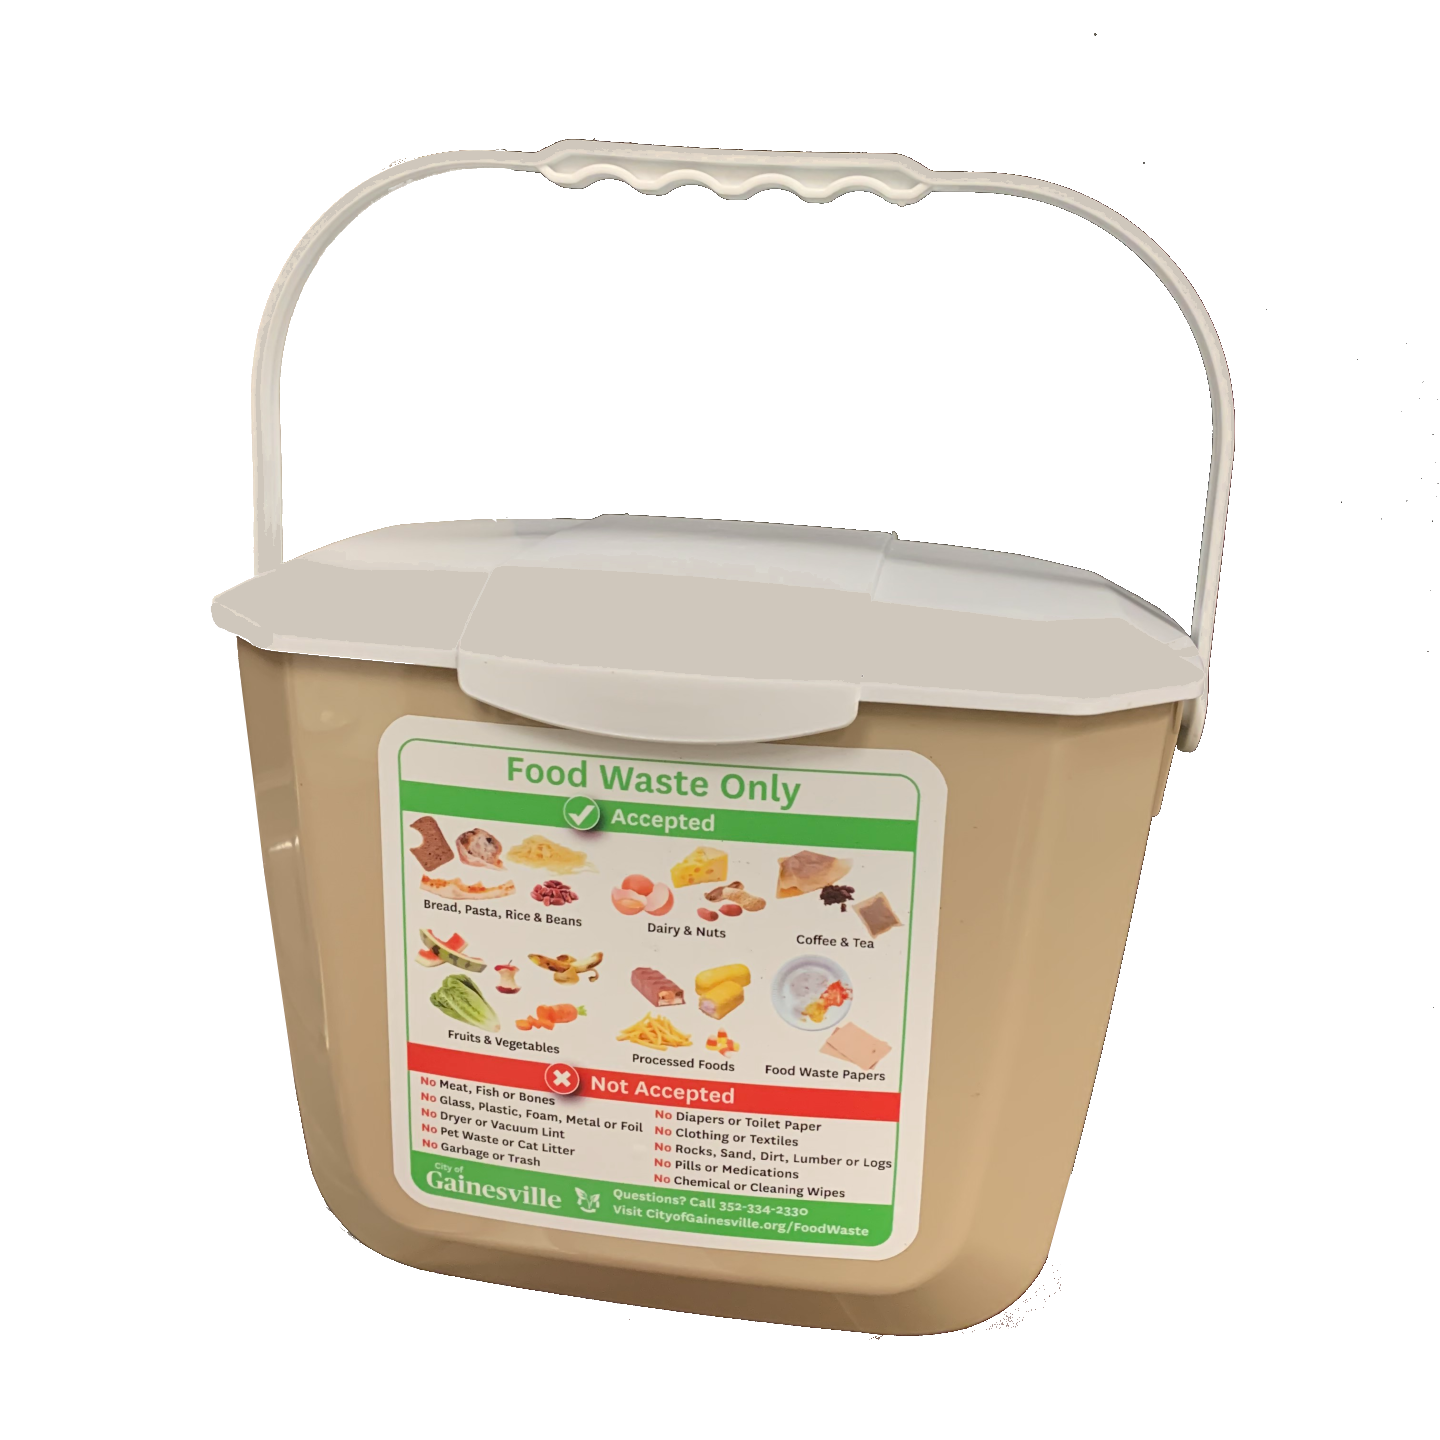 City of Gainesville tan kitchen compost pail with decal on front